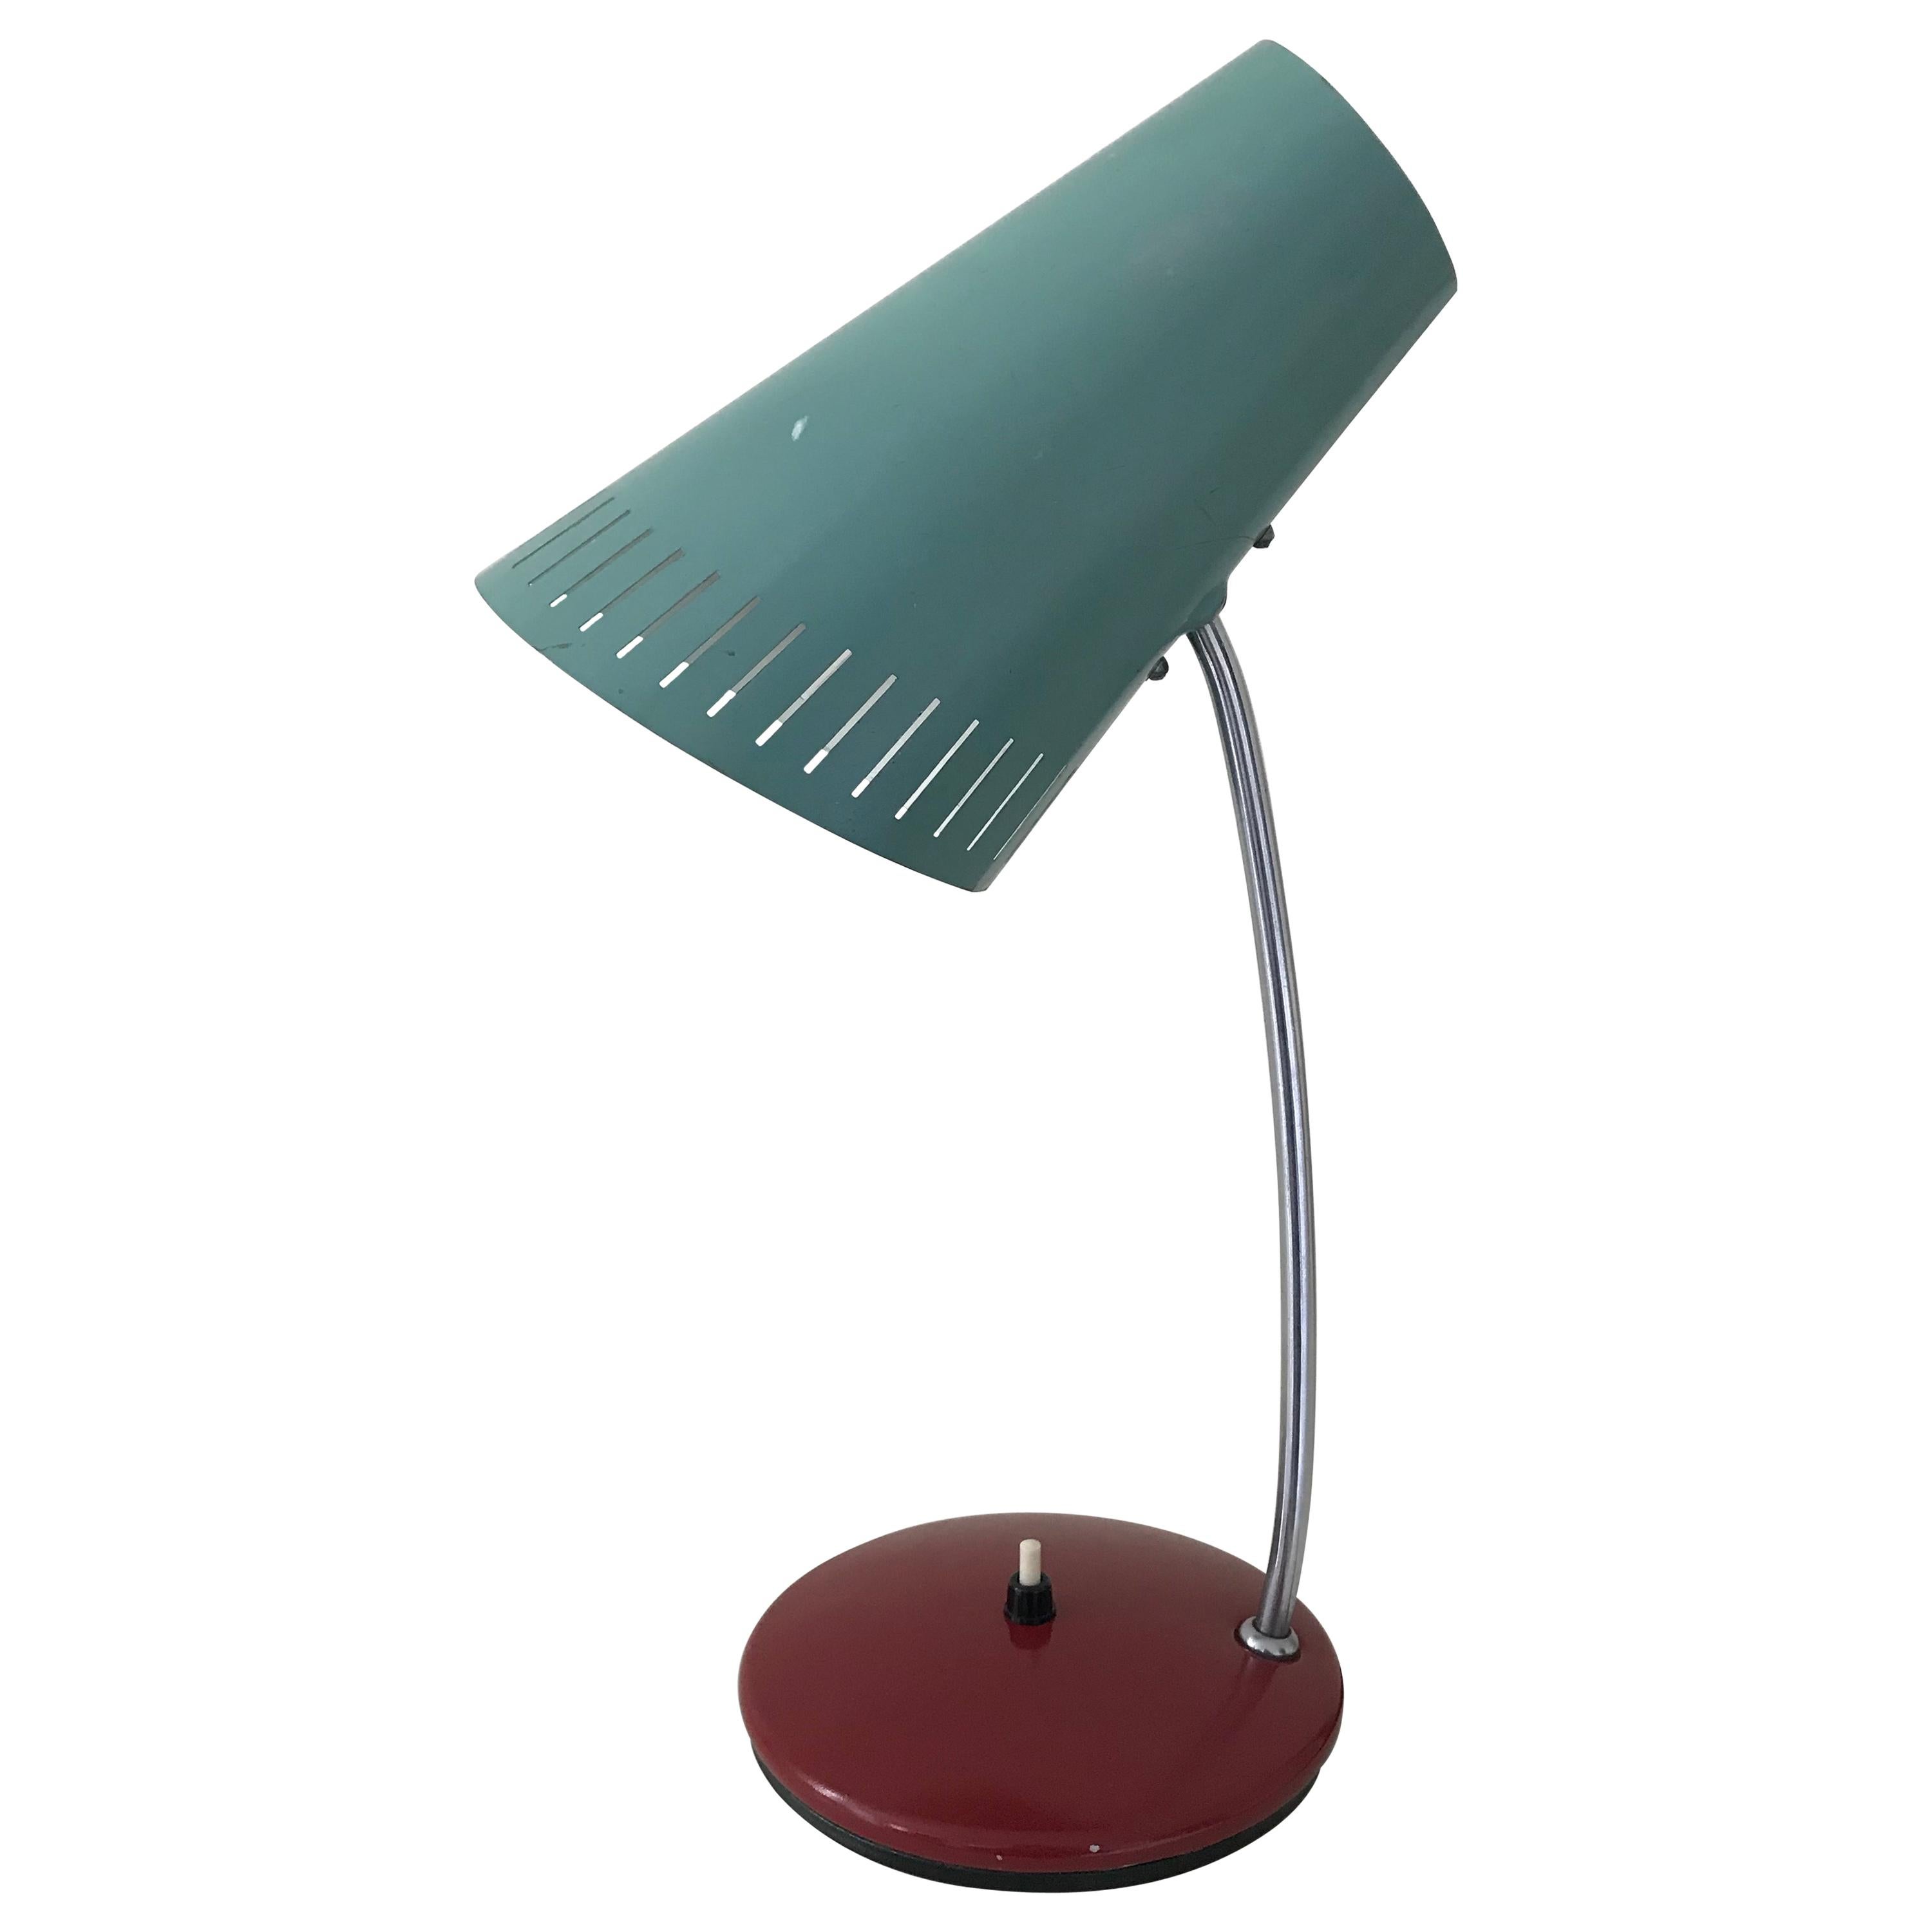 Mid-Century Modern Cone Shaped Desk Lamp, Turquoise and Red, Russia, 1966 For Sale